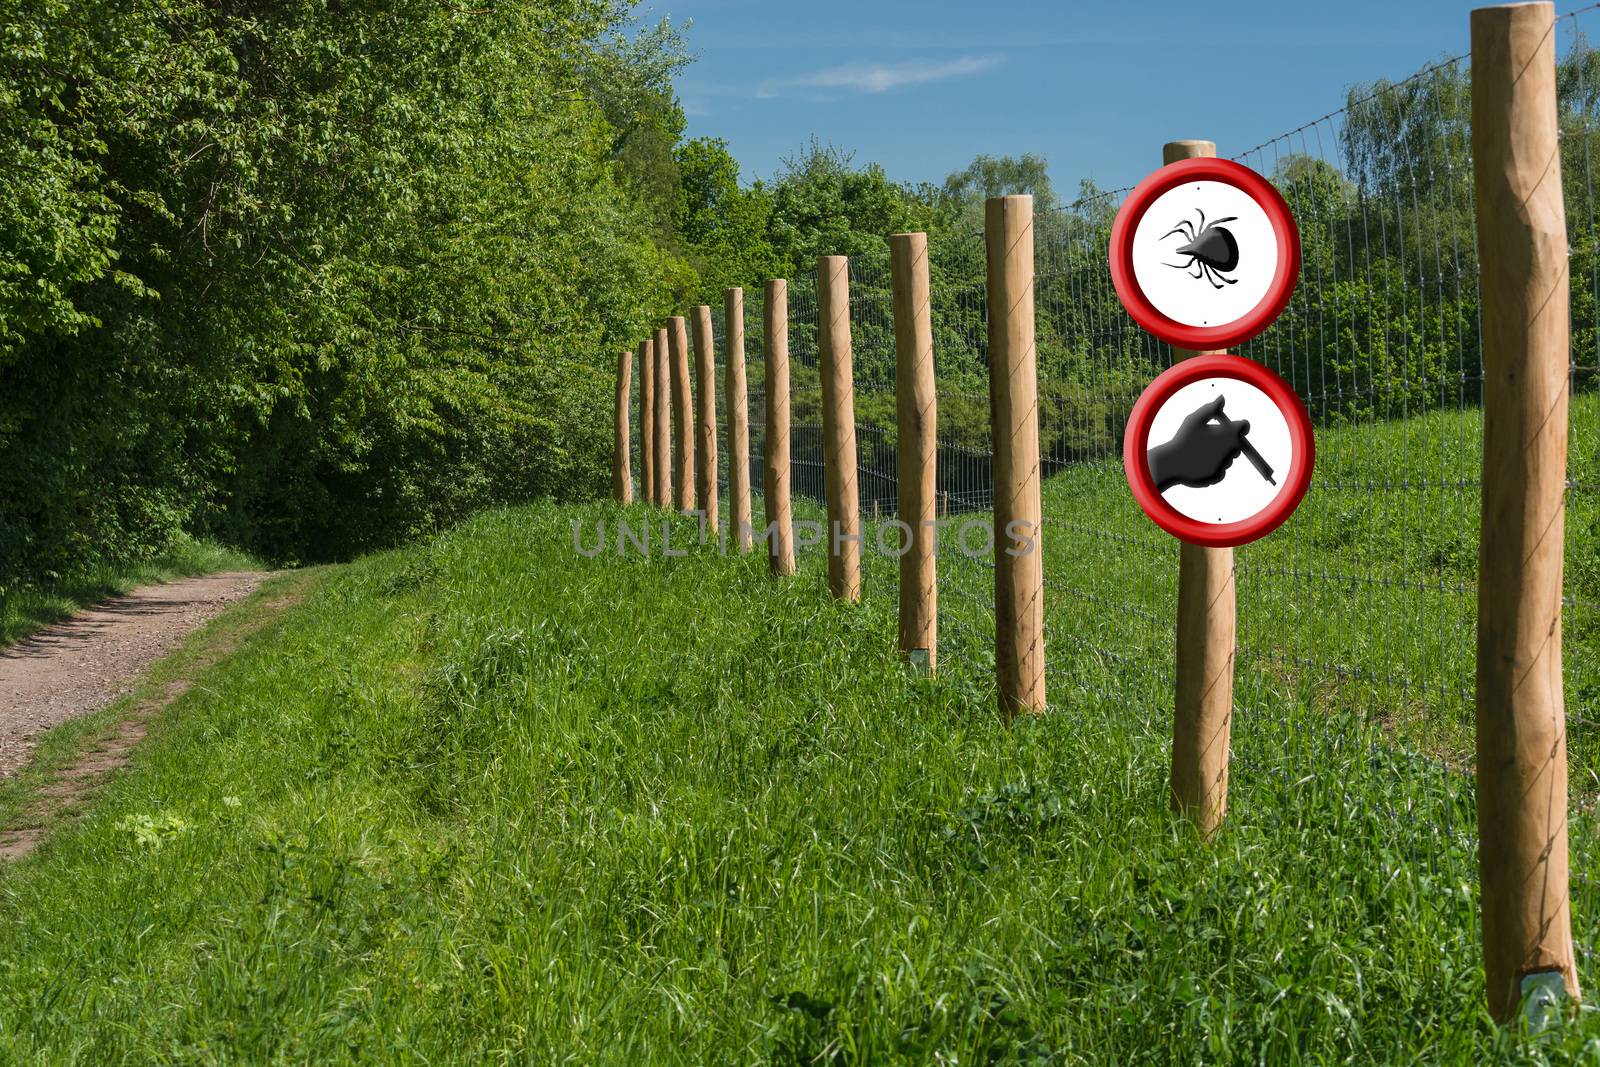 Borreliosis and tick warning. Two round red warning signs on a fence post in front of a green meadow. A sign with ticks symbol the other shows a hand with syringe.